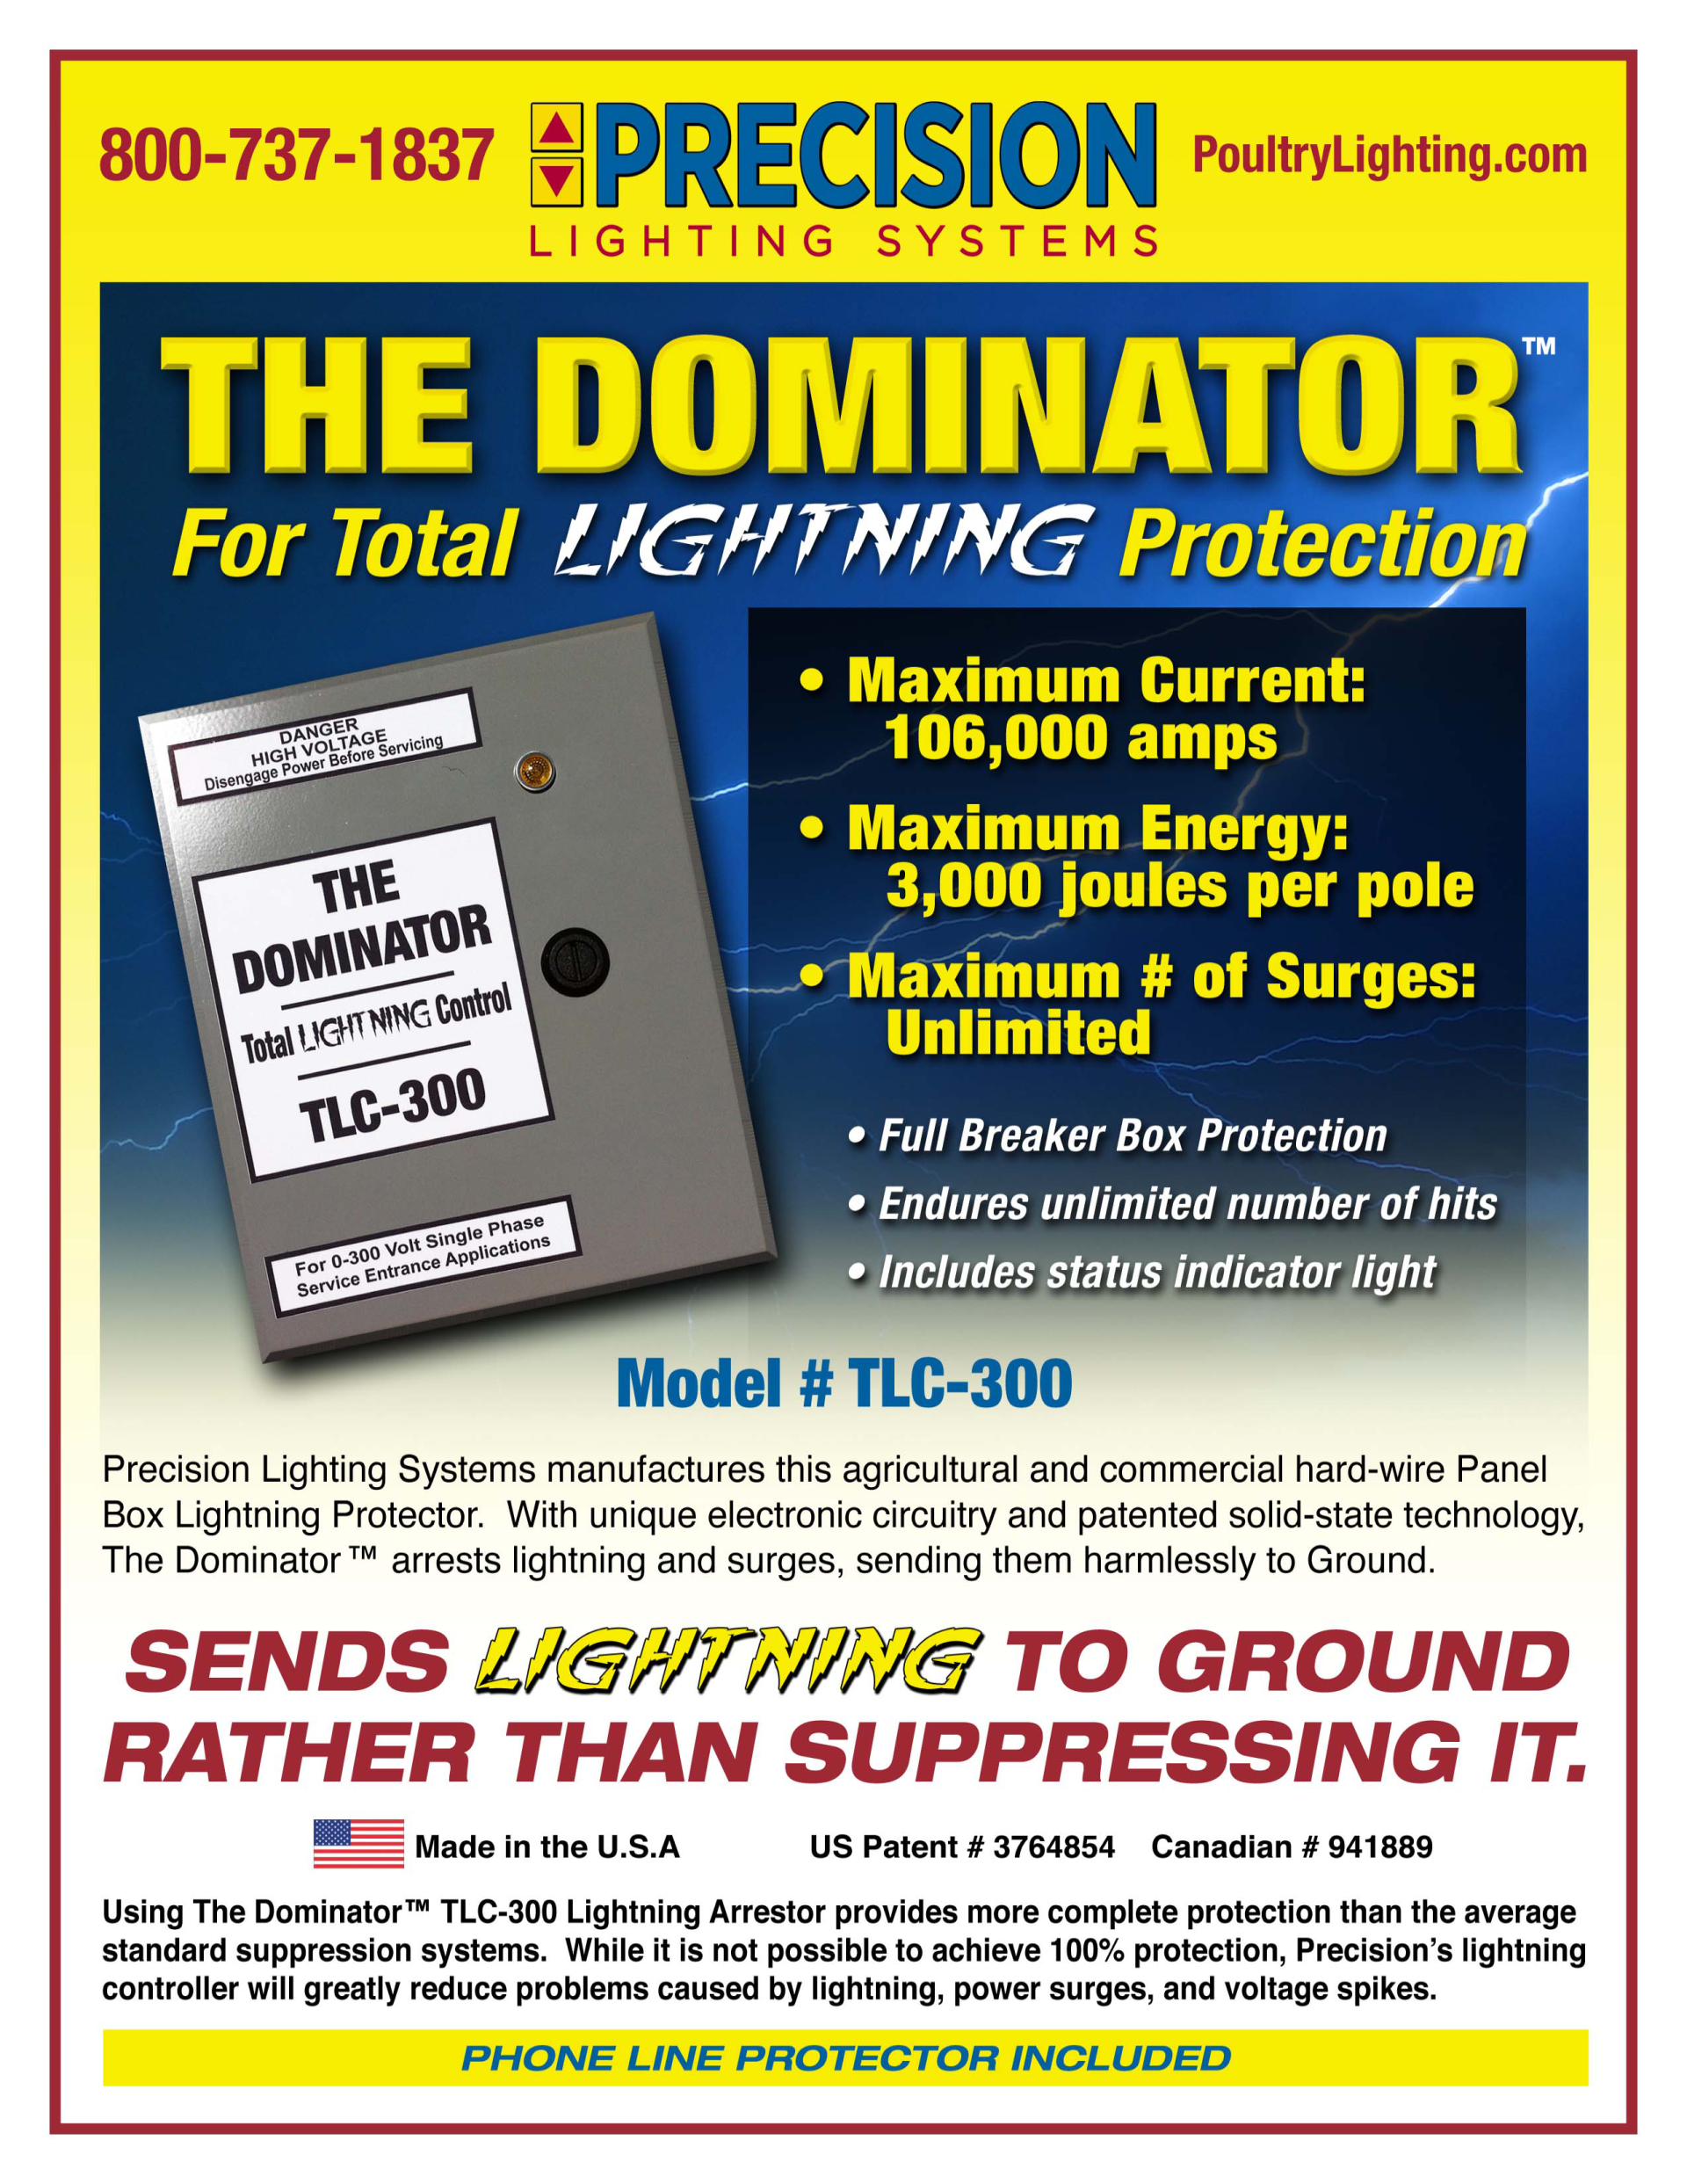 The dominator for total lightning protection sends lightning to ground rather than suppressing it.